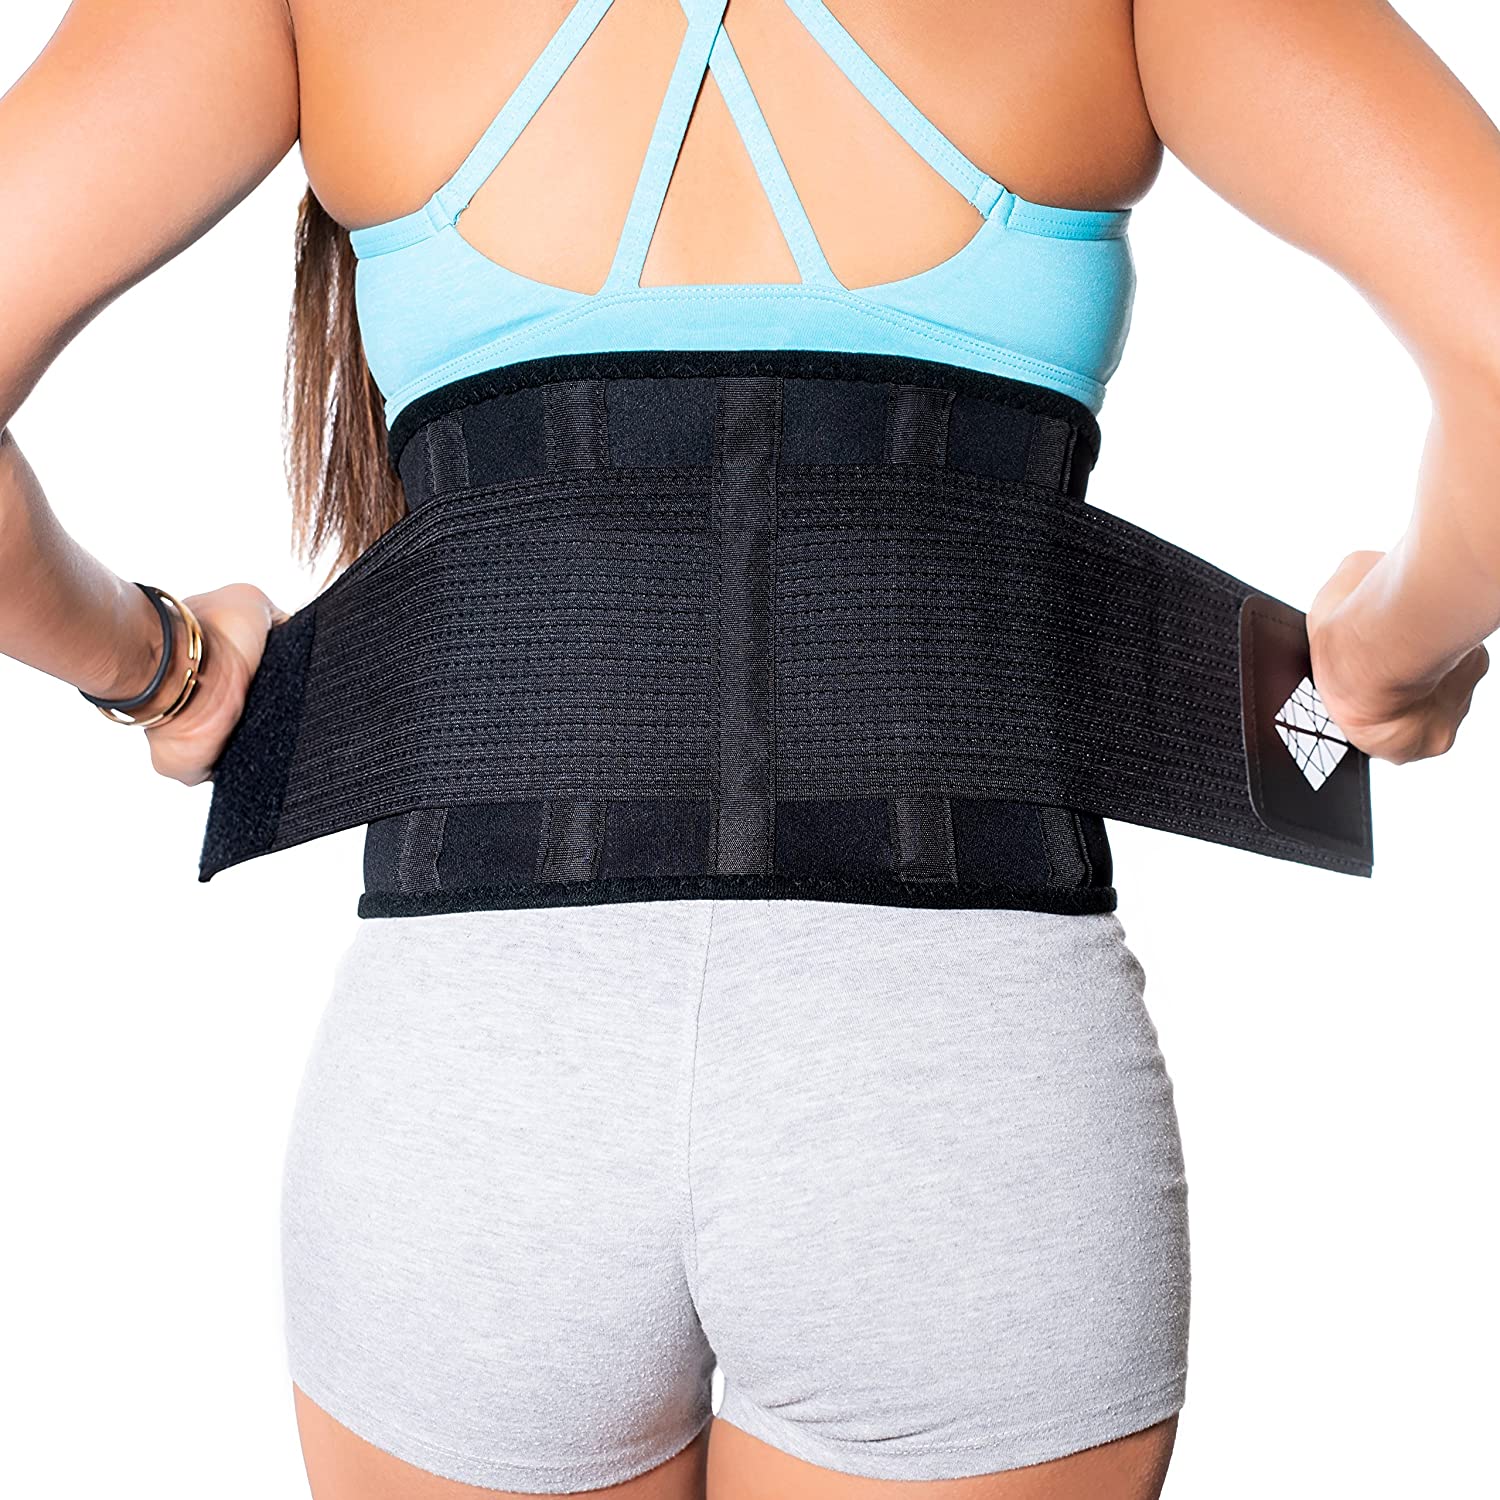 plus Size Lower Back Brace, 3X-5XL, Lumbar Support for Pain Relief